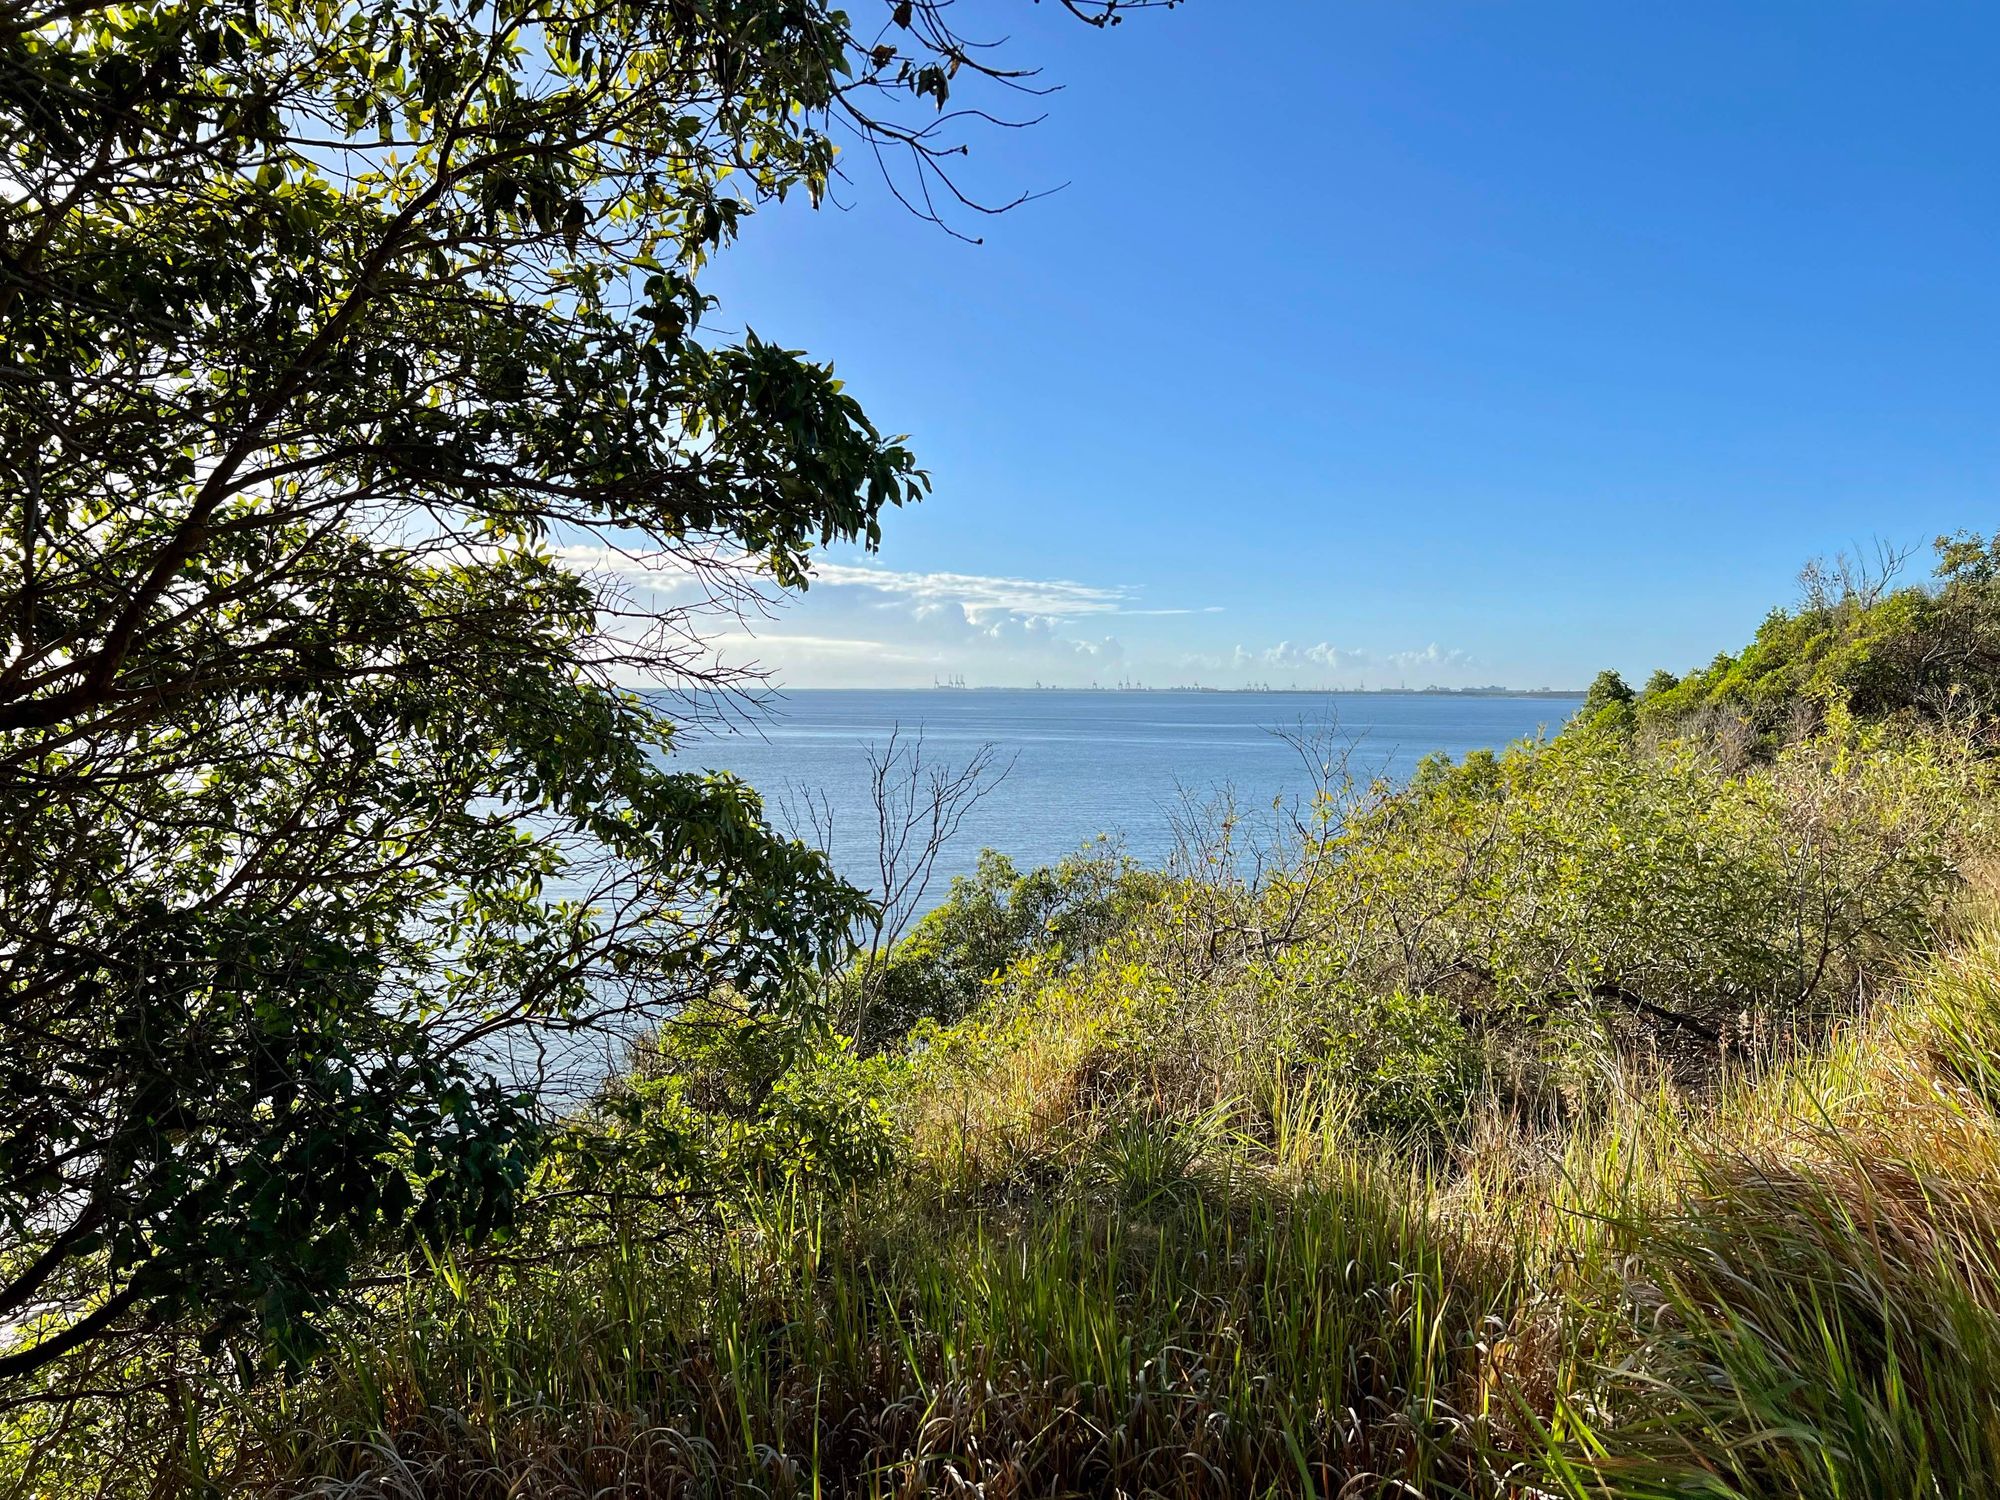 photo of landscape with ocean in middle ground, blue sky up top, bushes in foreground